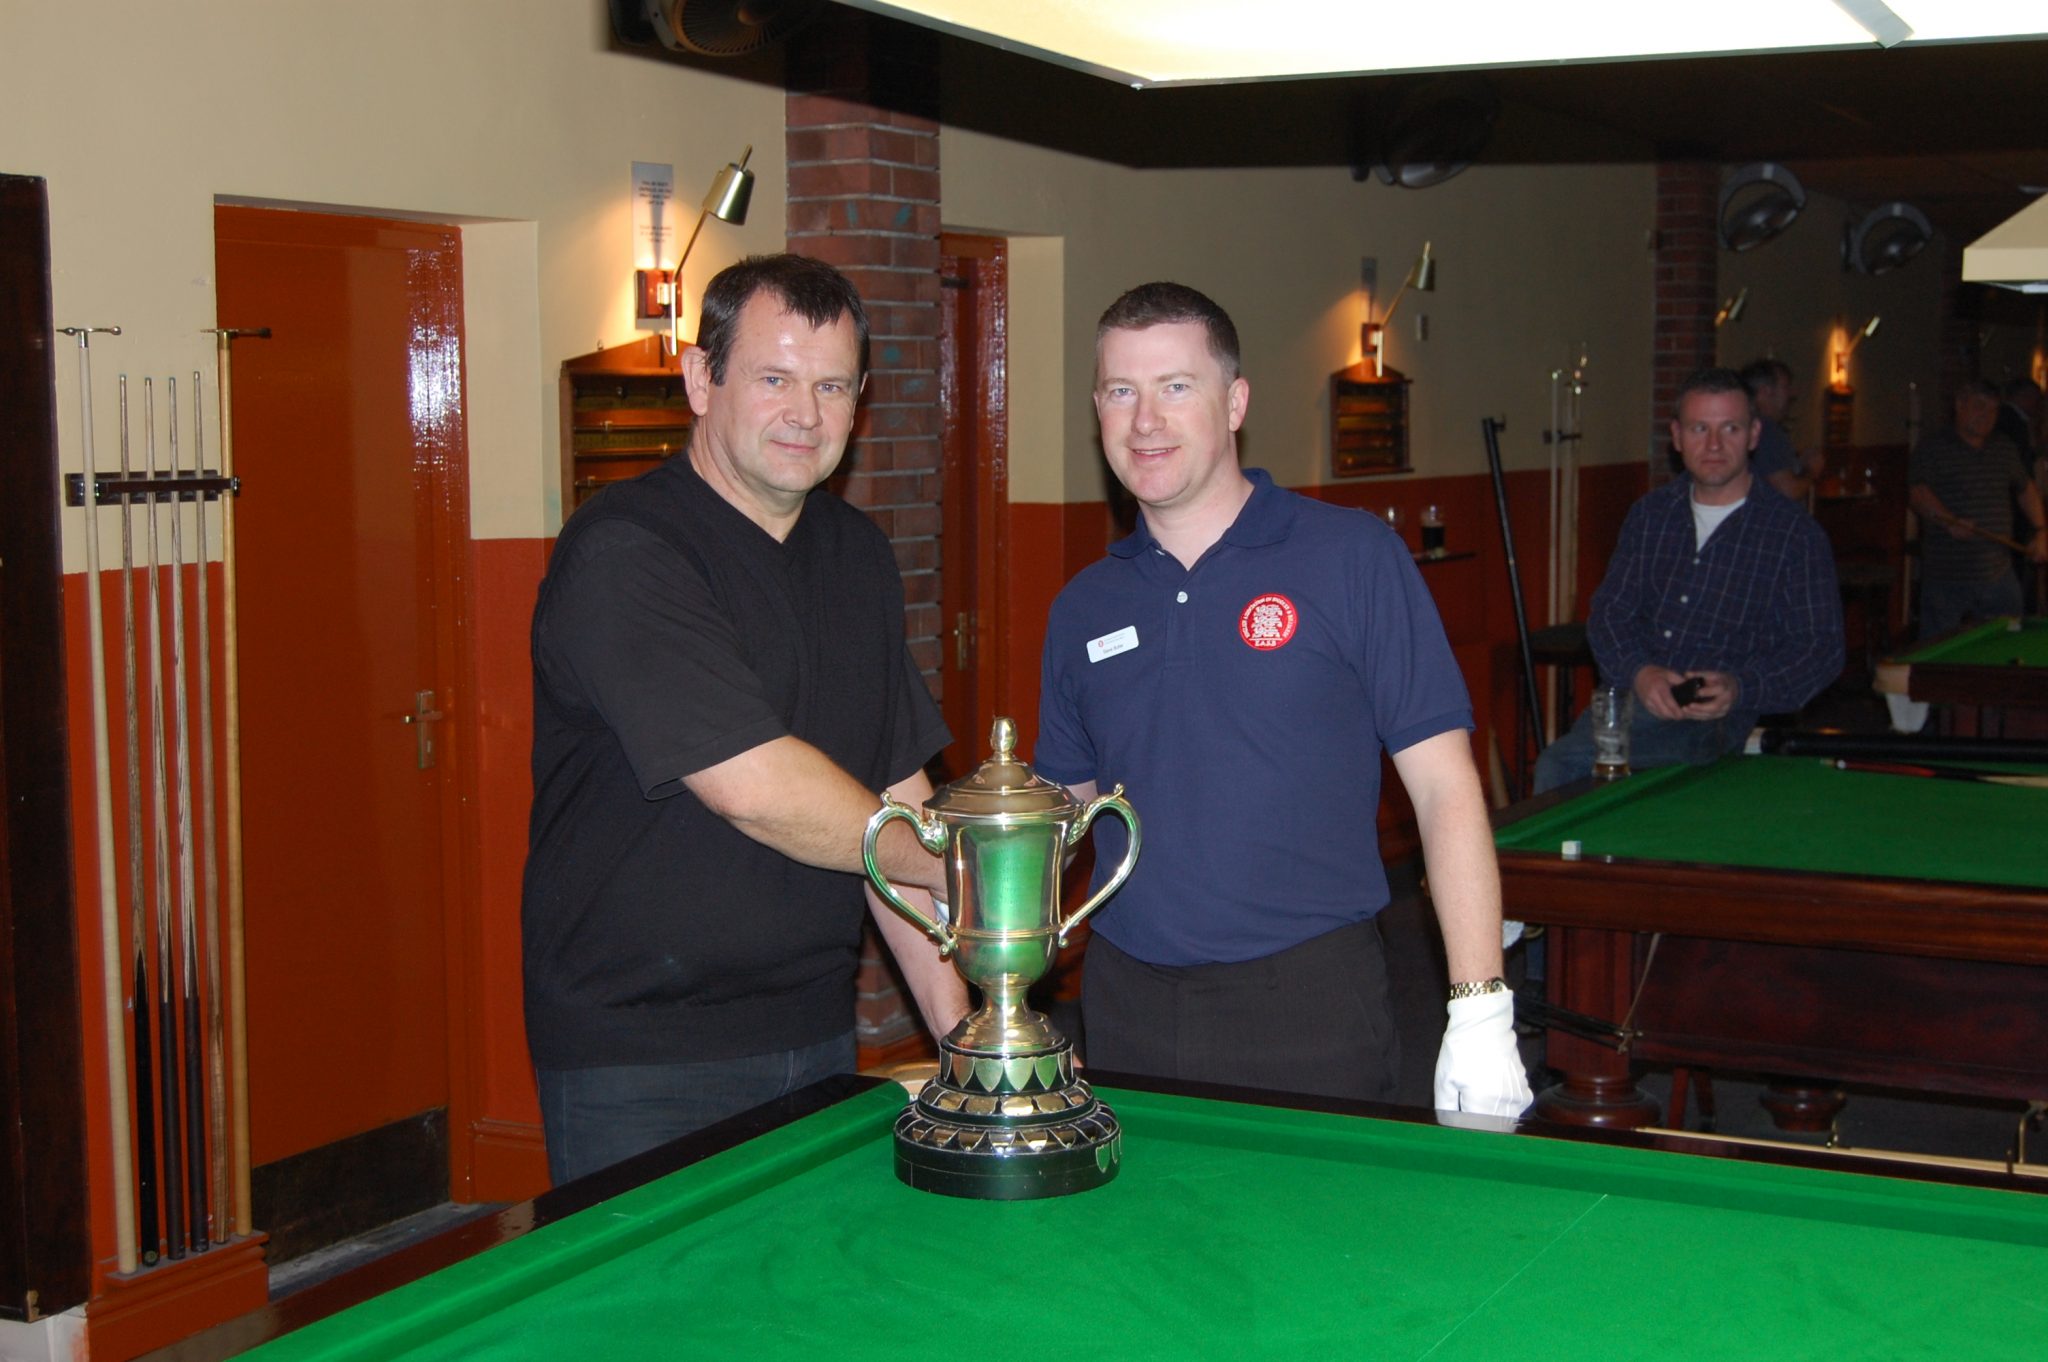 Notts Amateur Snooker Championship to be run by Nottingham Snooker this season